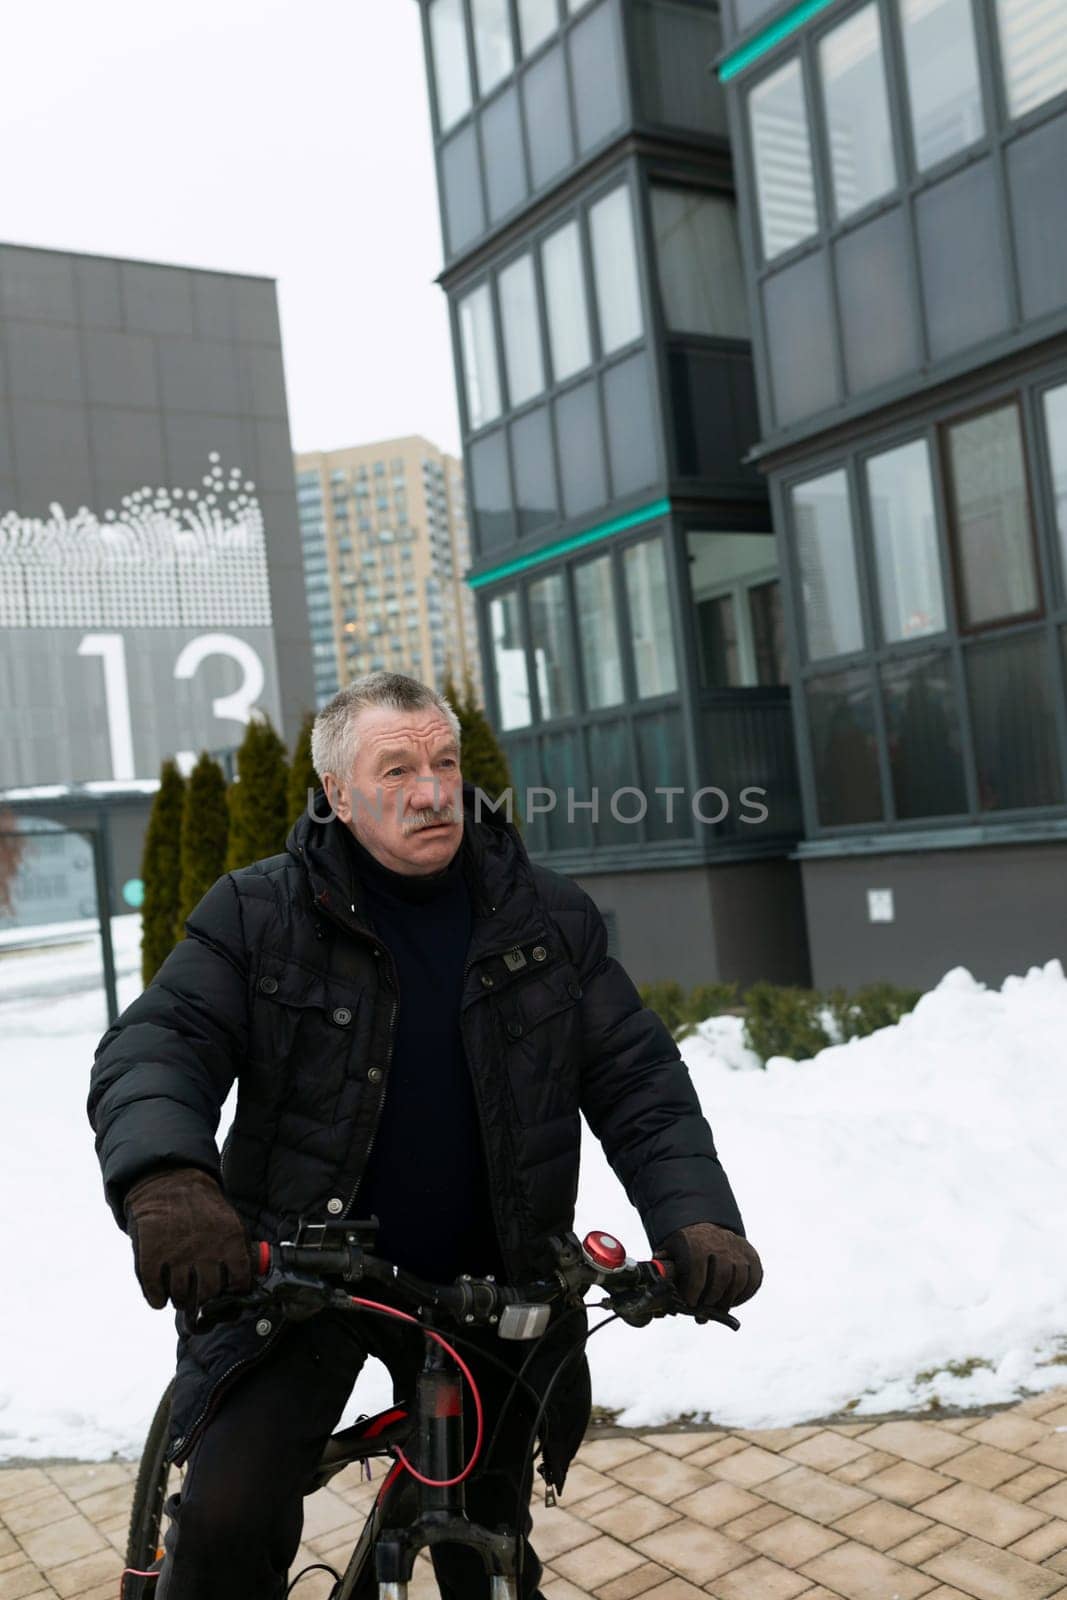 European elderly man leading a healthy lifestyle and riding a bicycle in winter by TRMK